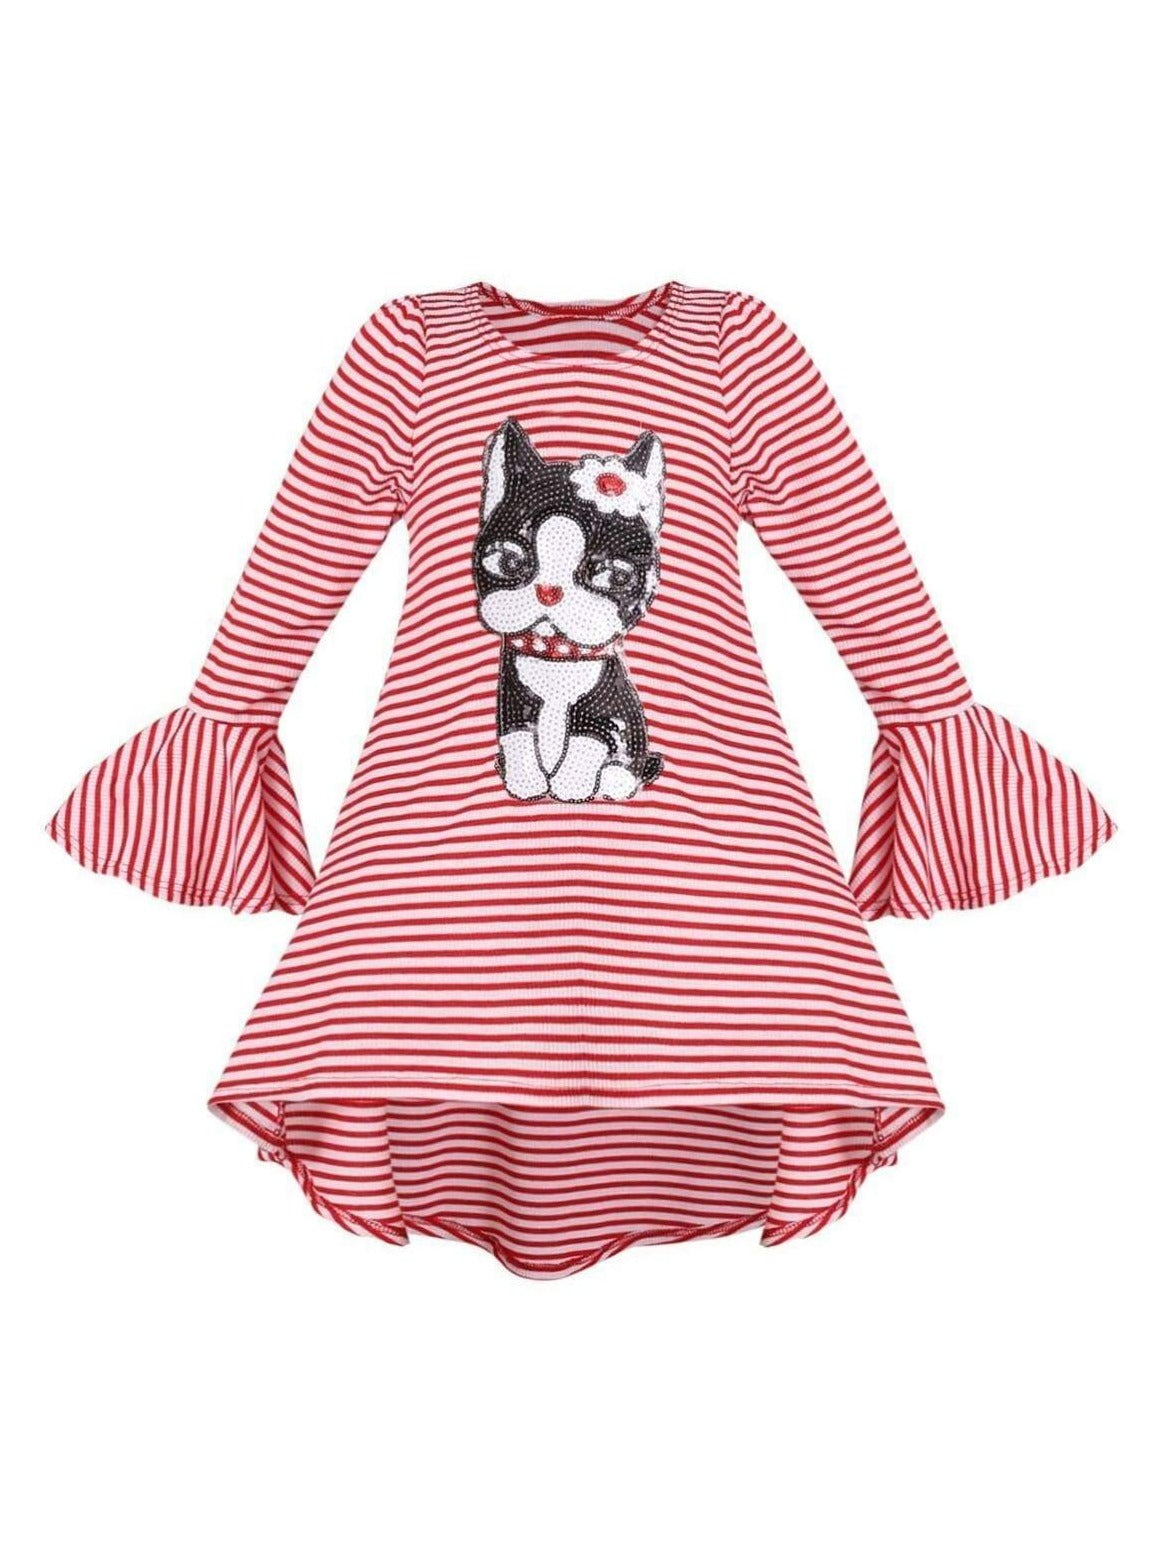 Girls Striped Flared Long Sleeve Animal Applique Top - Red / 2T/3T - Girls Fall Top